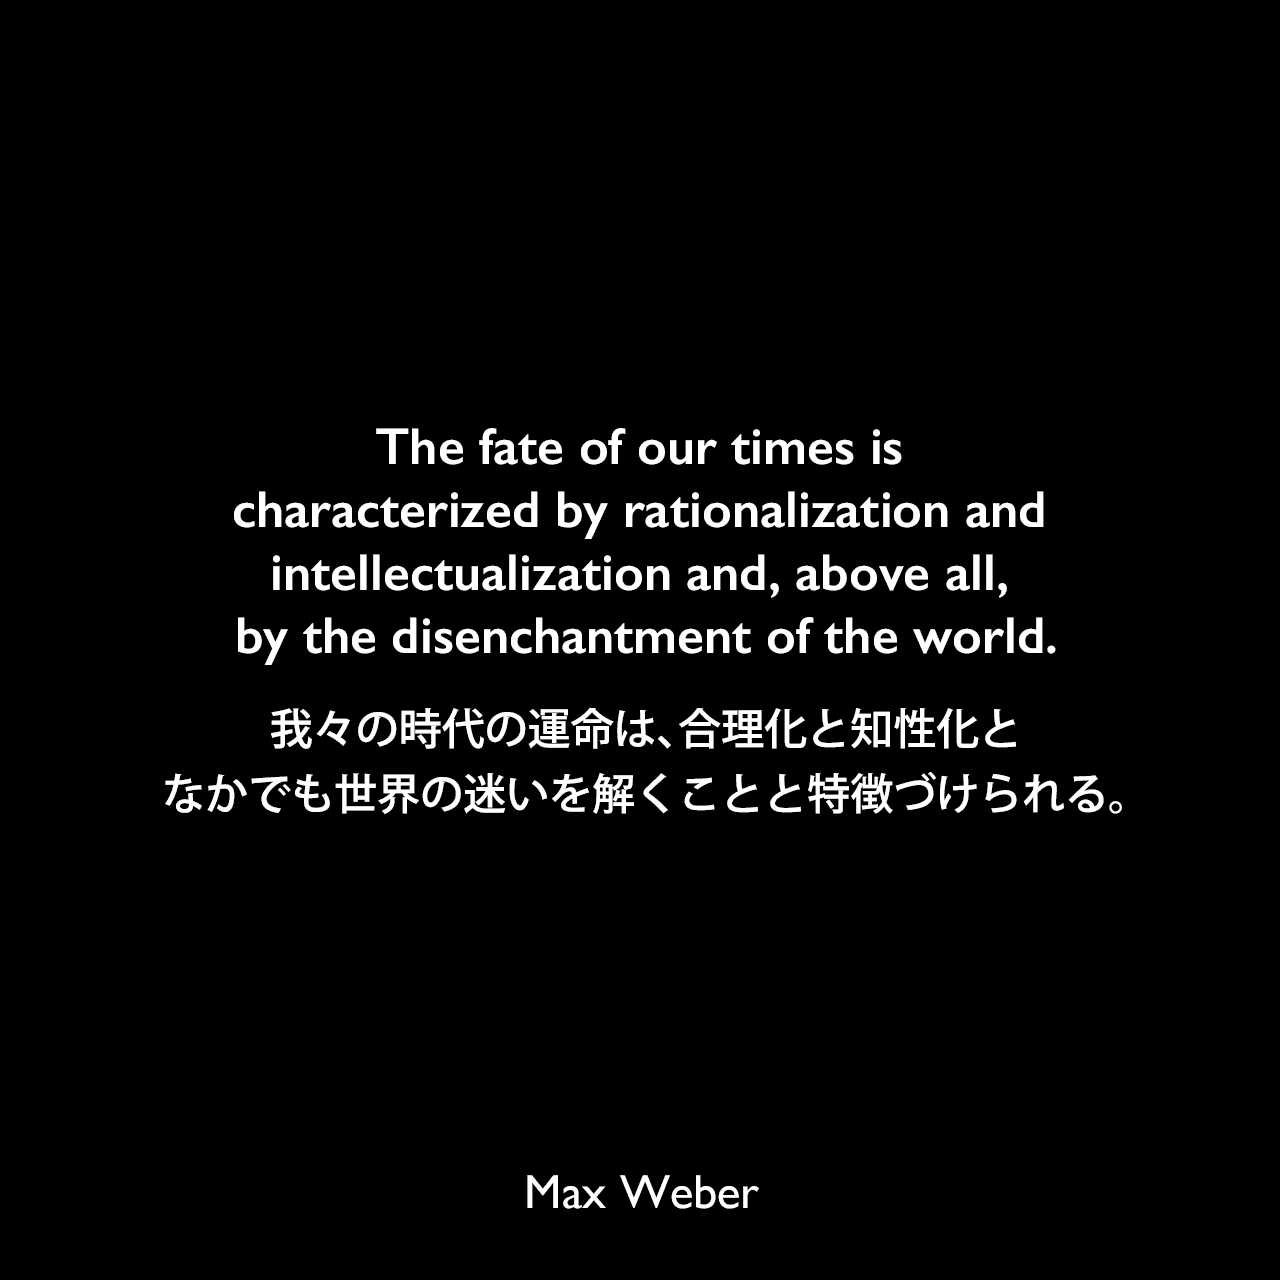 The fate of our times is characterized by rationalization and intellectualization and, above all, by the disenchantment of the world.我々の時代の運命は、合理化と知性化と、なかでも世界の迷いを解くことと特徴づけられる。Max Weber